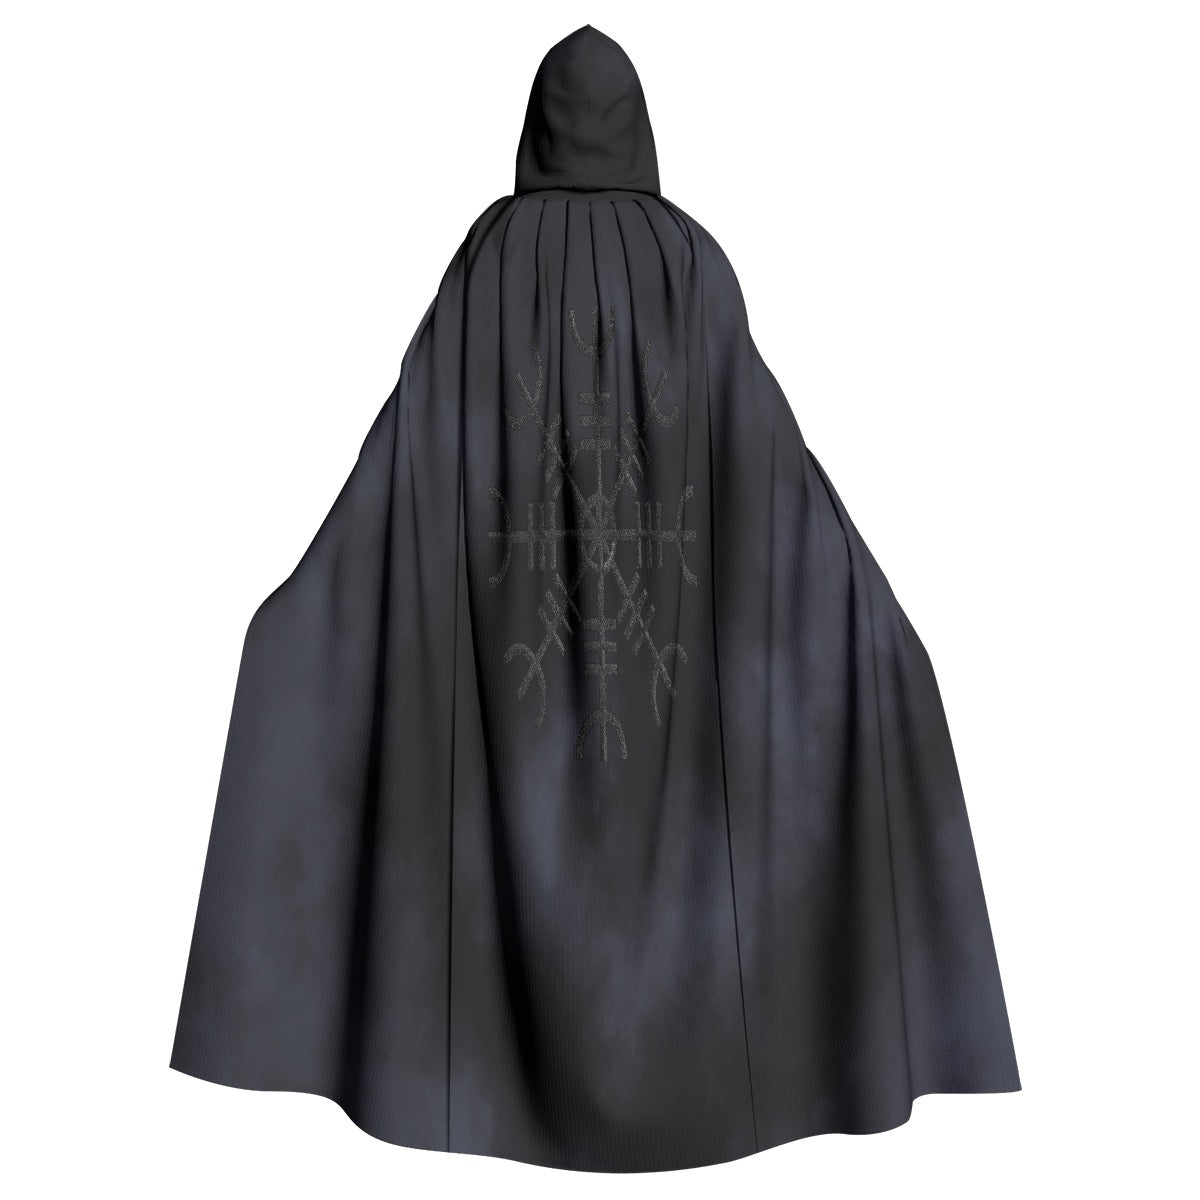 Spellcaster by Patti Negri Unisex Hooded Cloak - "Protection"